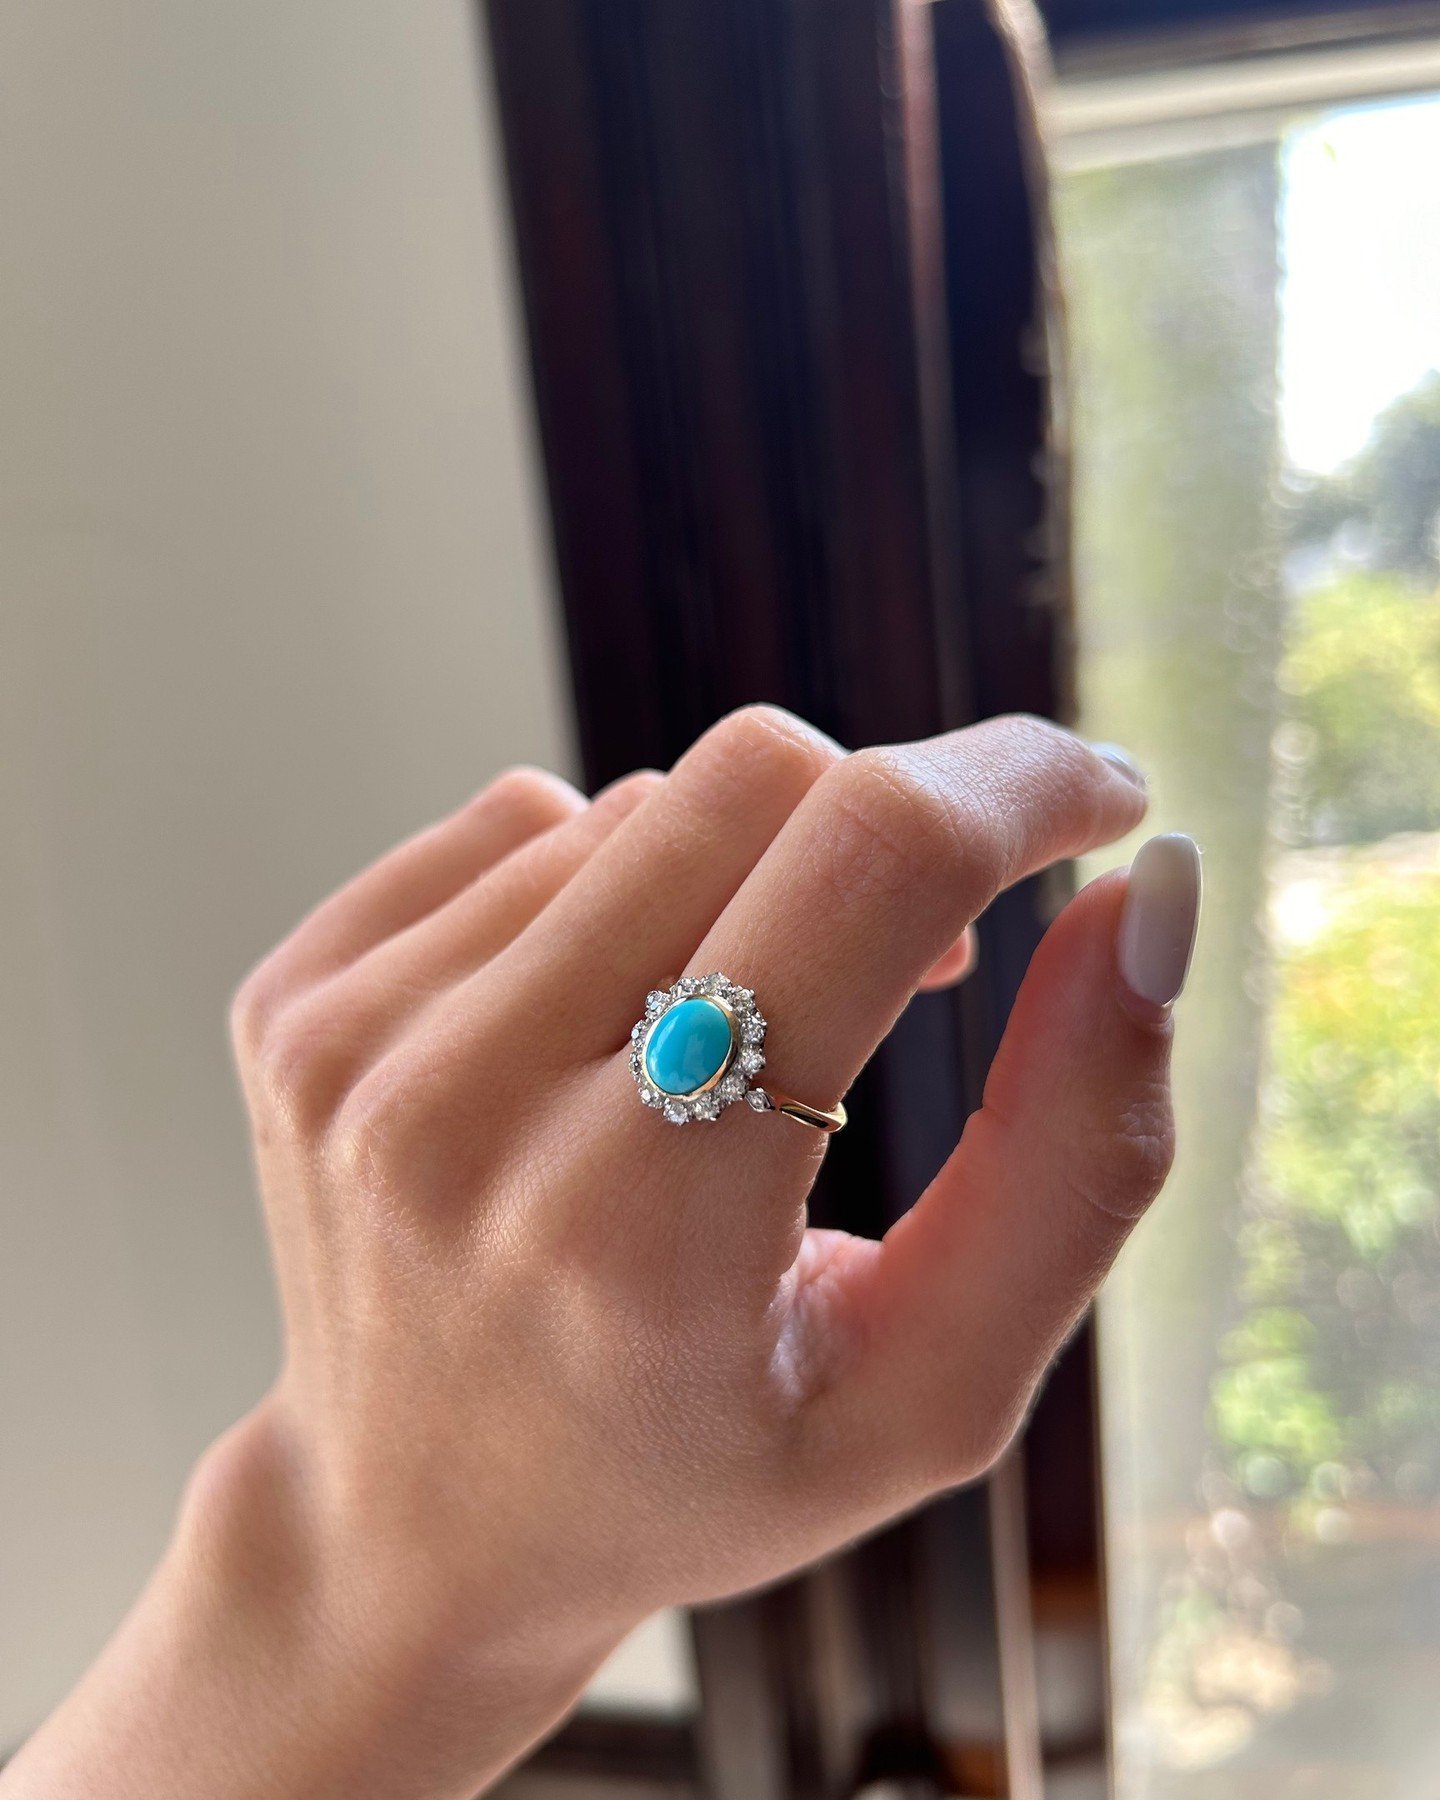 Newly available in our treasure chest! Check out this incredible early 20th century Gold + Turquoise Single Stone Ring with Old Cut Diamonds 🤍💎 DM for more info!